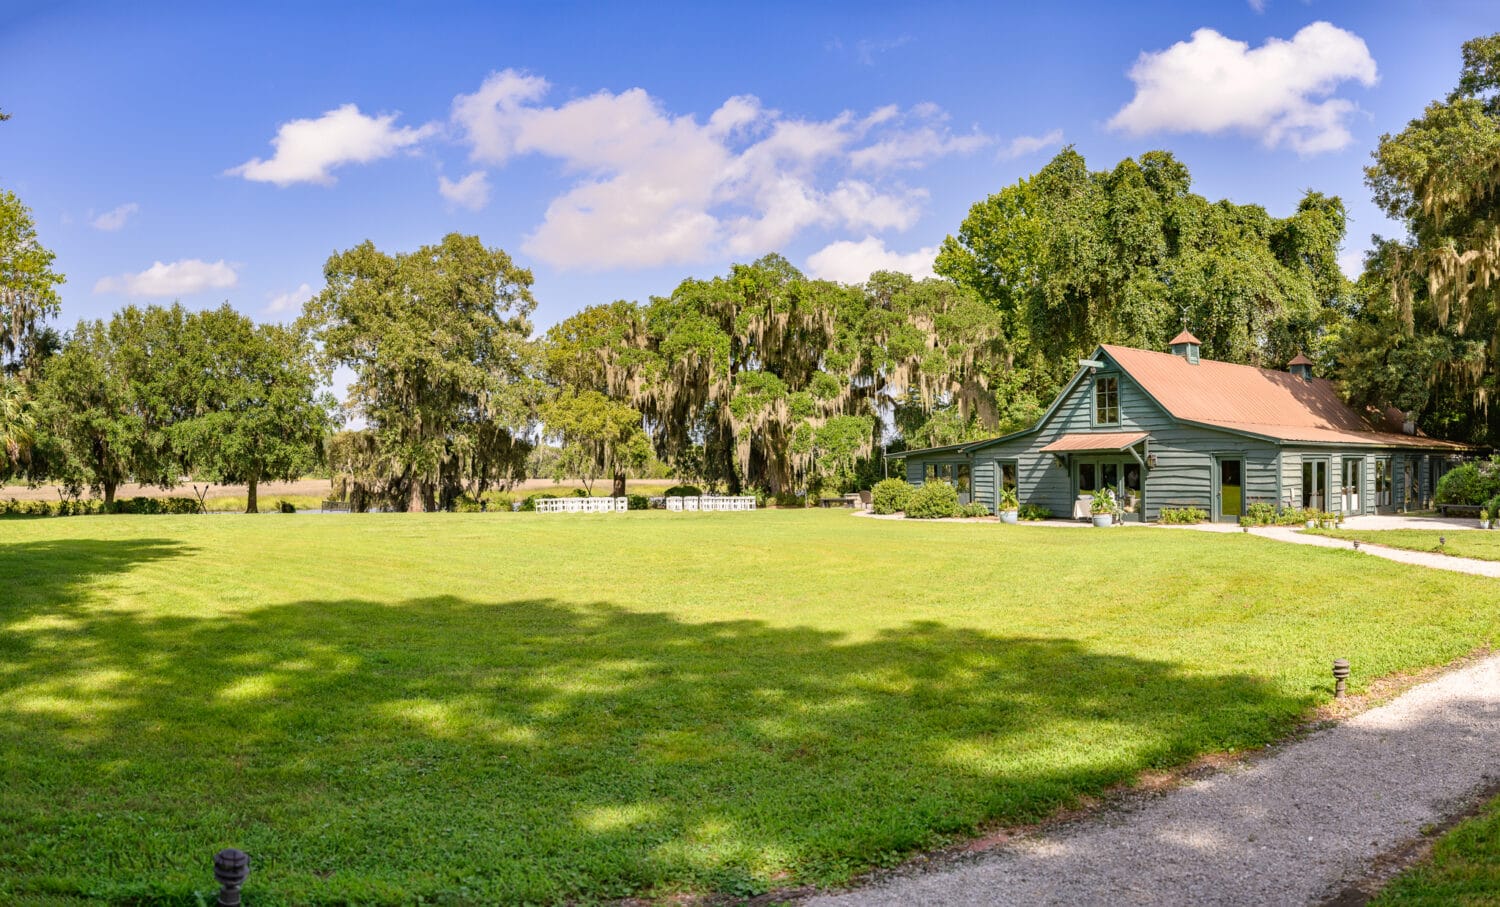 HDR Panorama of the Carriage House - Magnolia Plantation